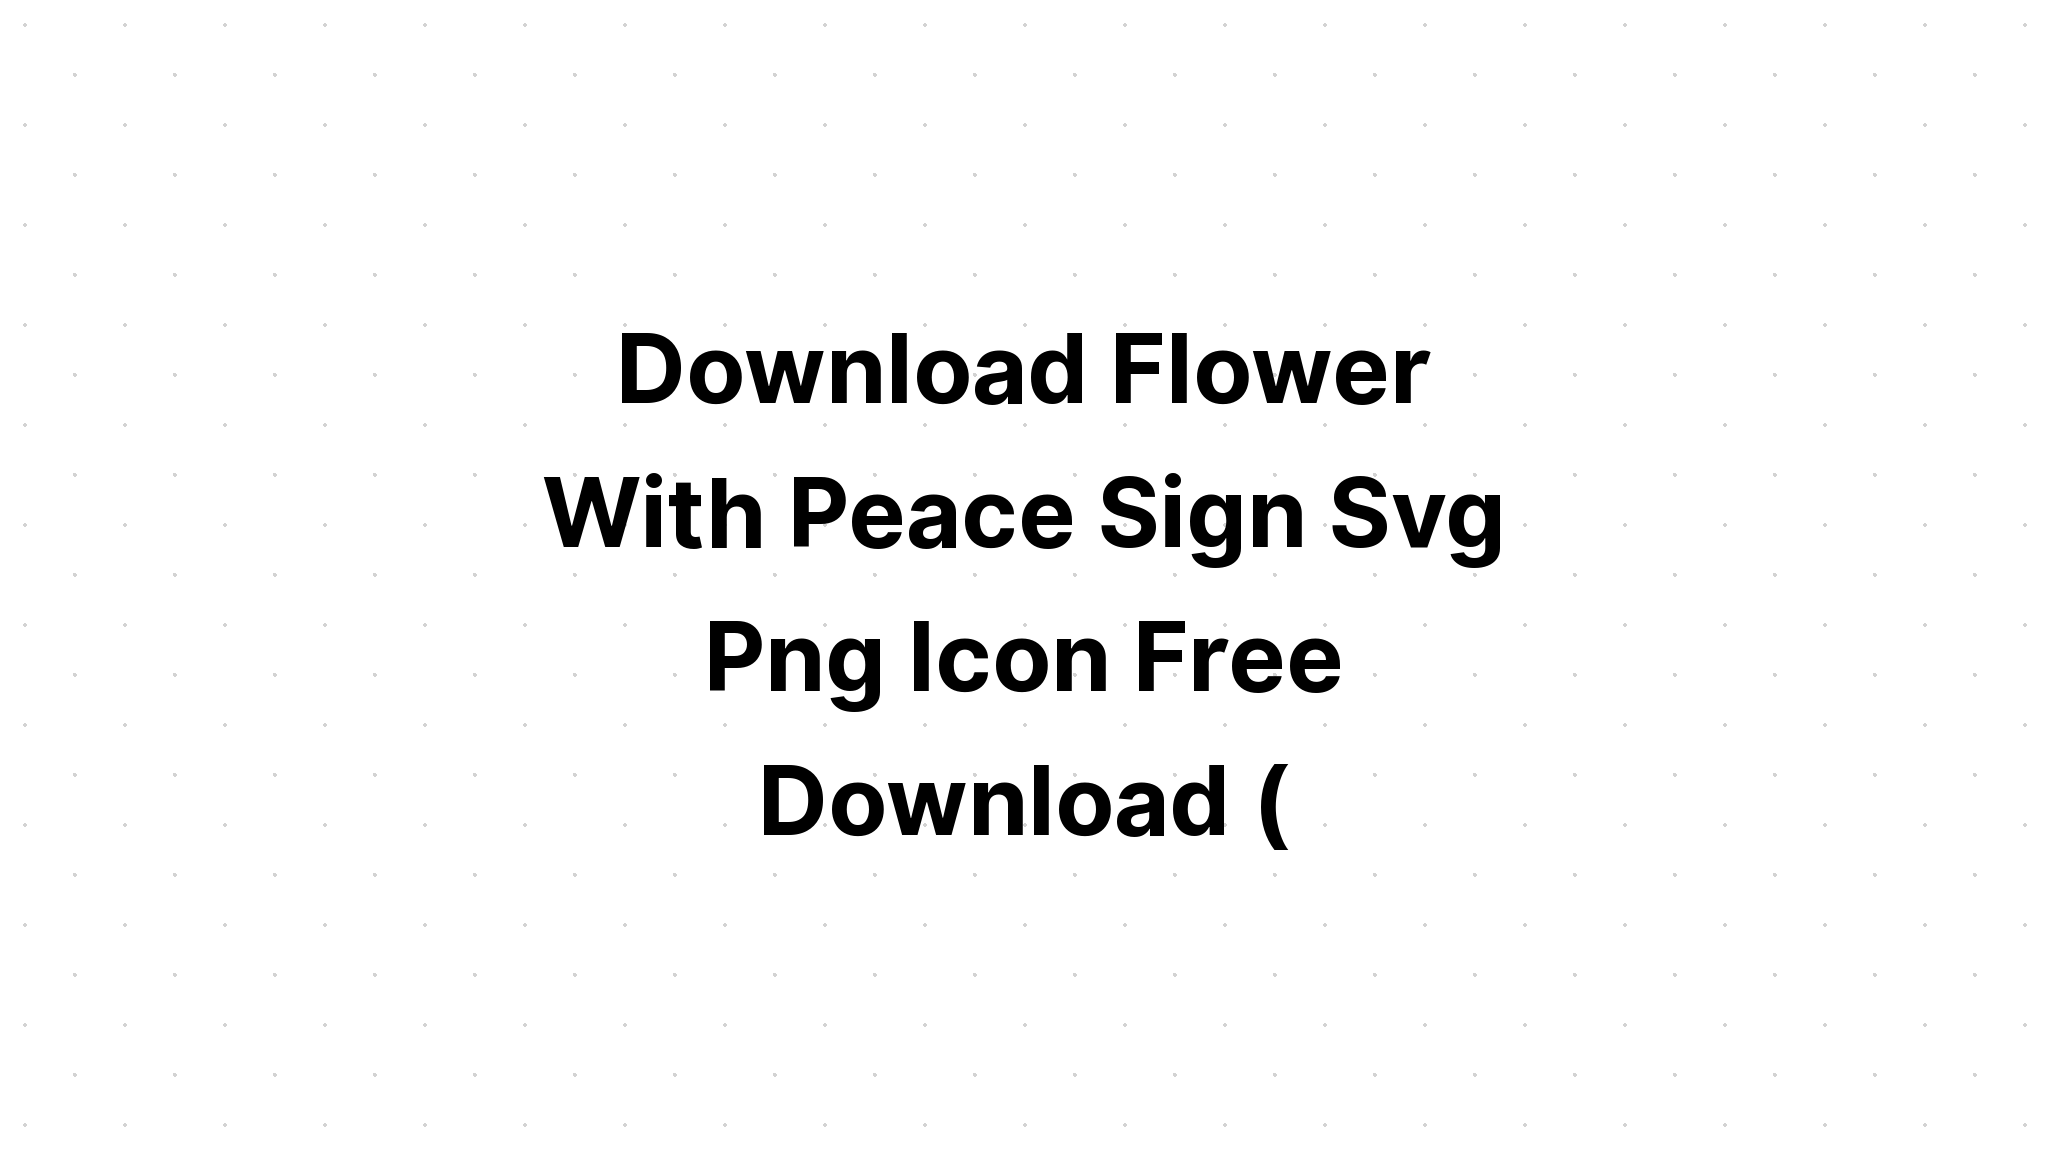 Download Peace Free Svg - Layered SVG Cut File